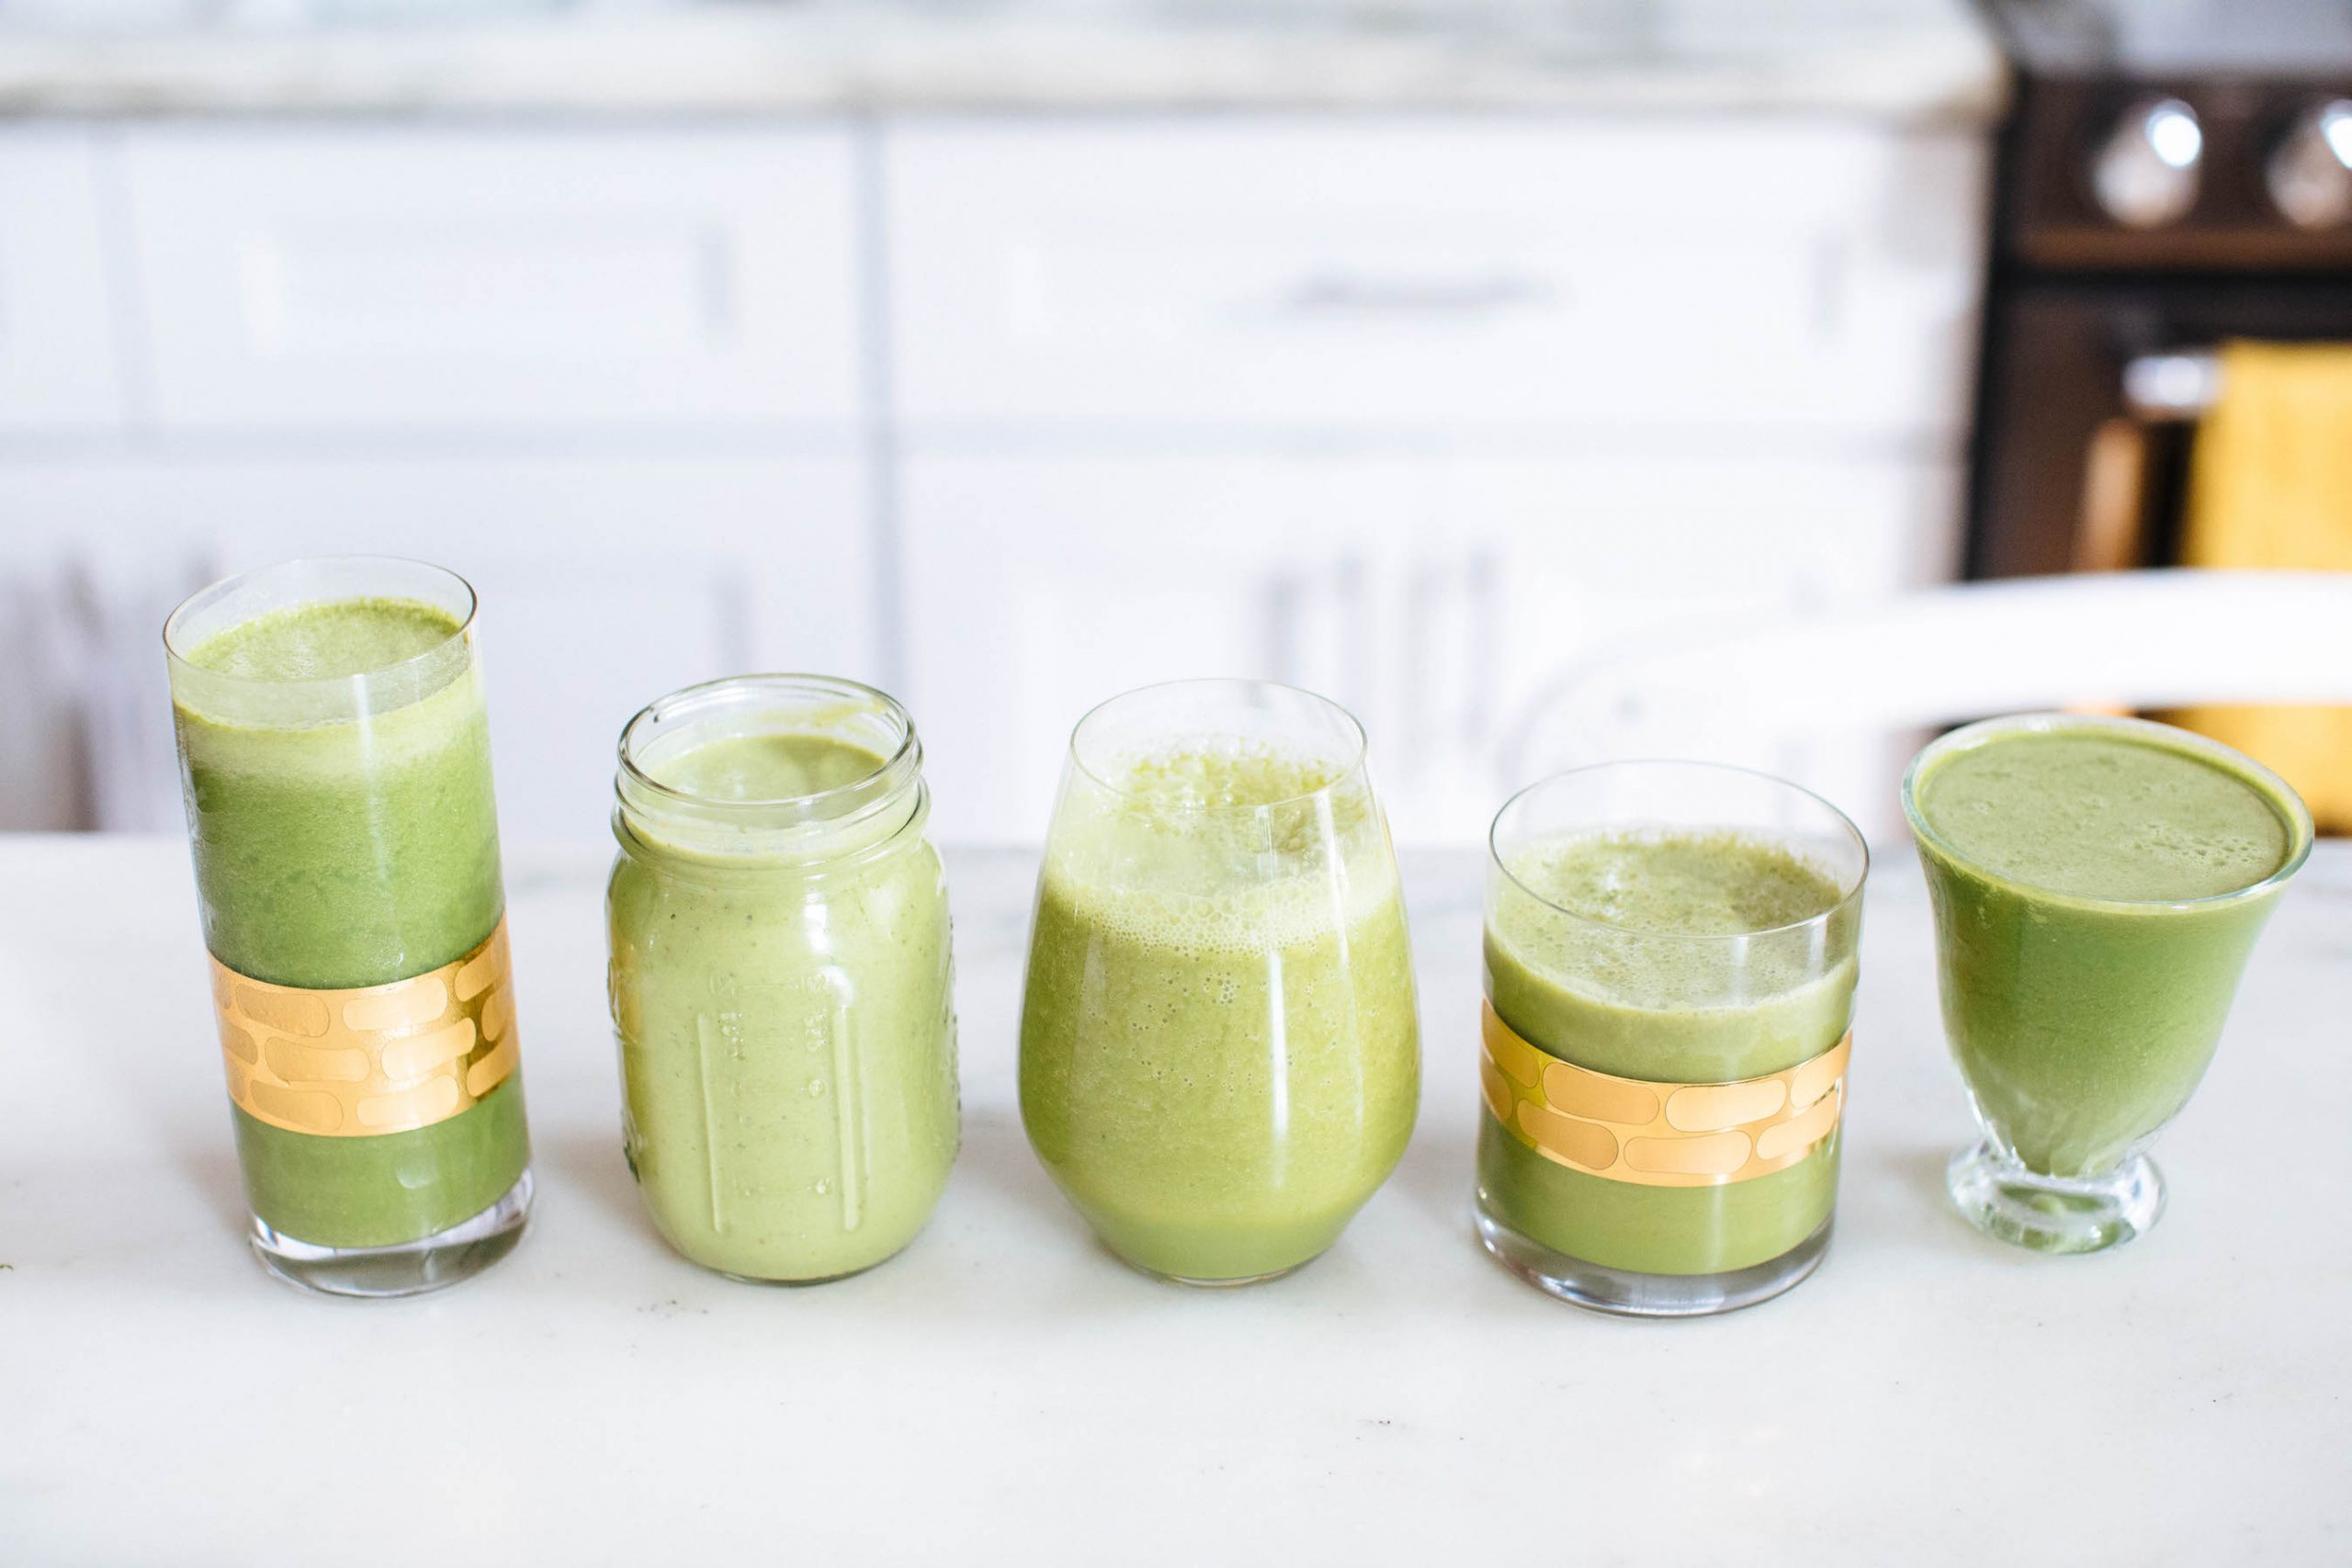 15 Healthy Smoothie Recipes You'll Want to Drink Every Day